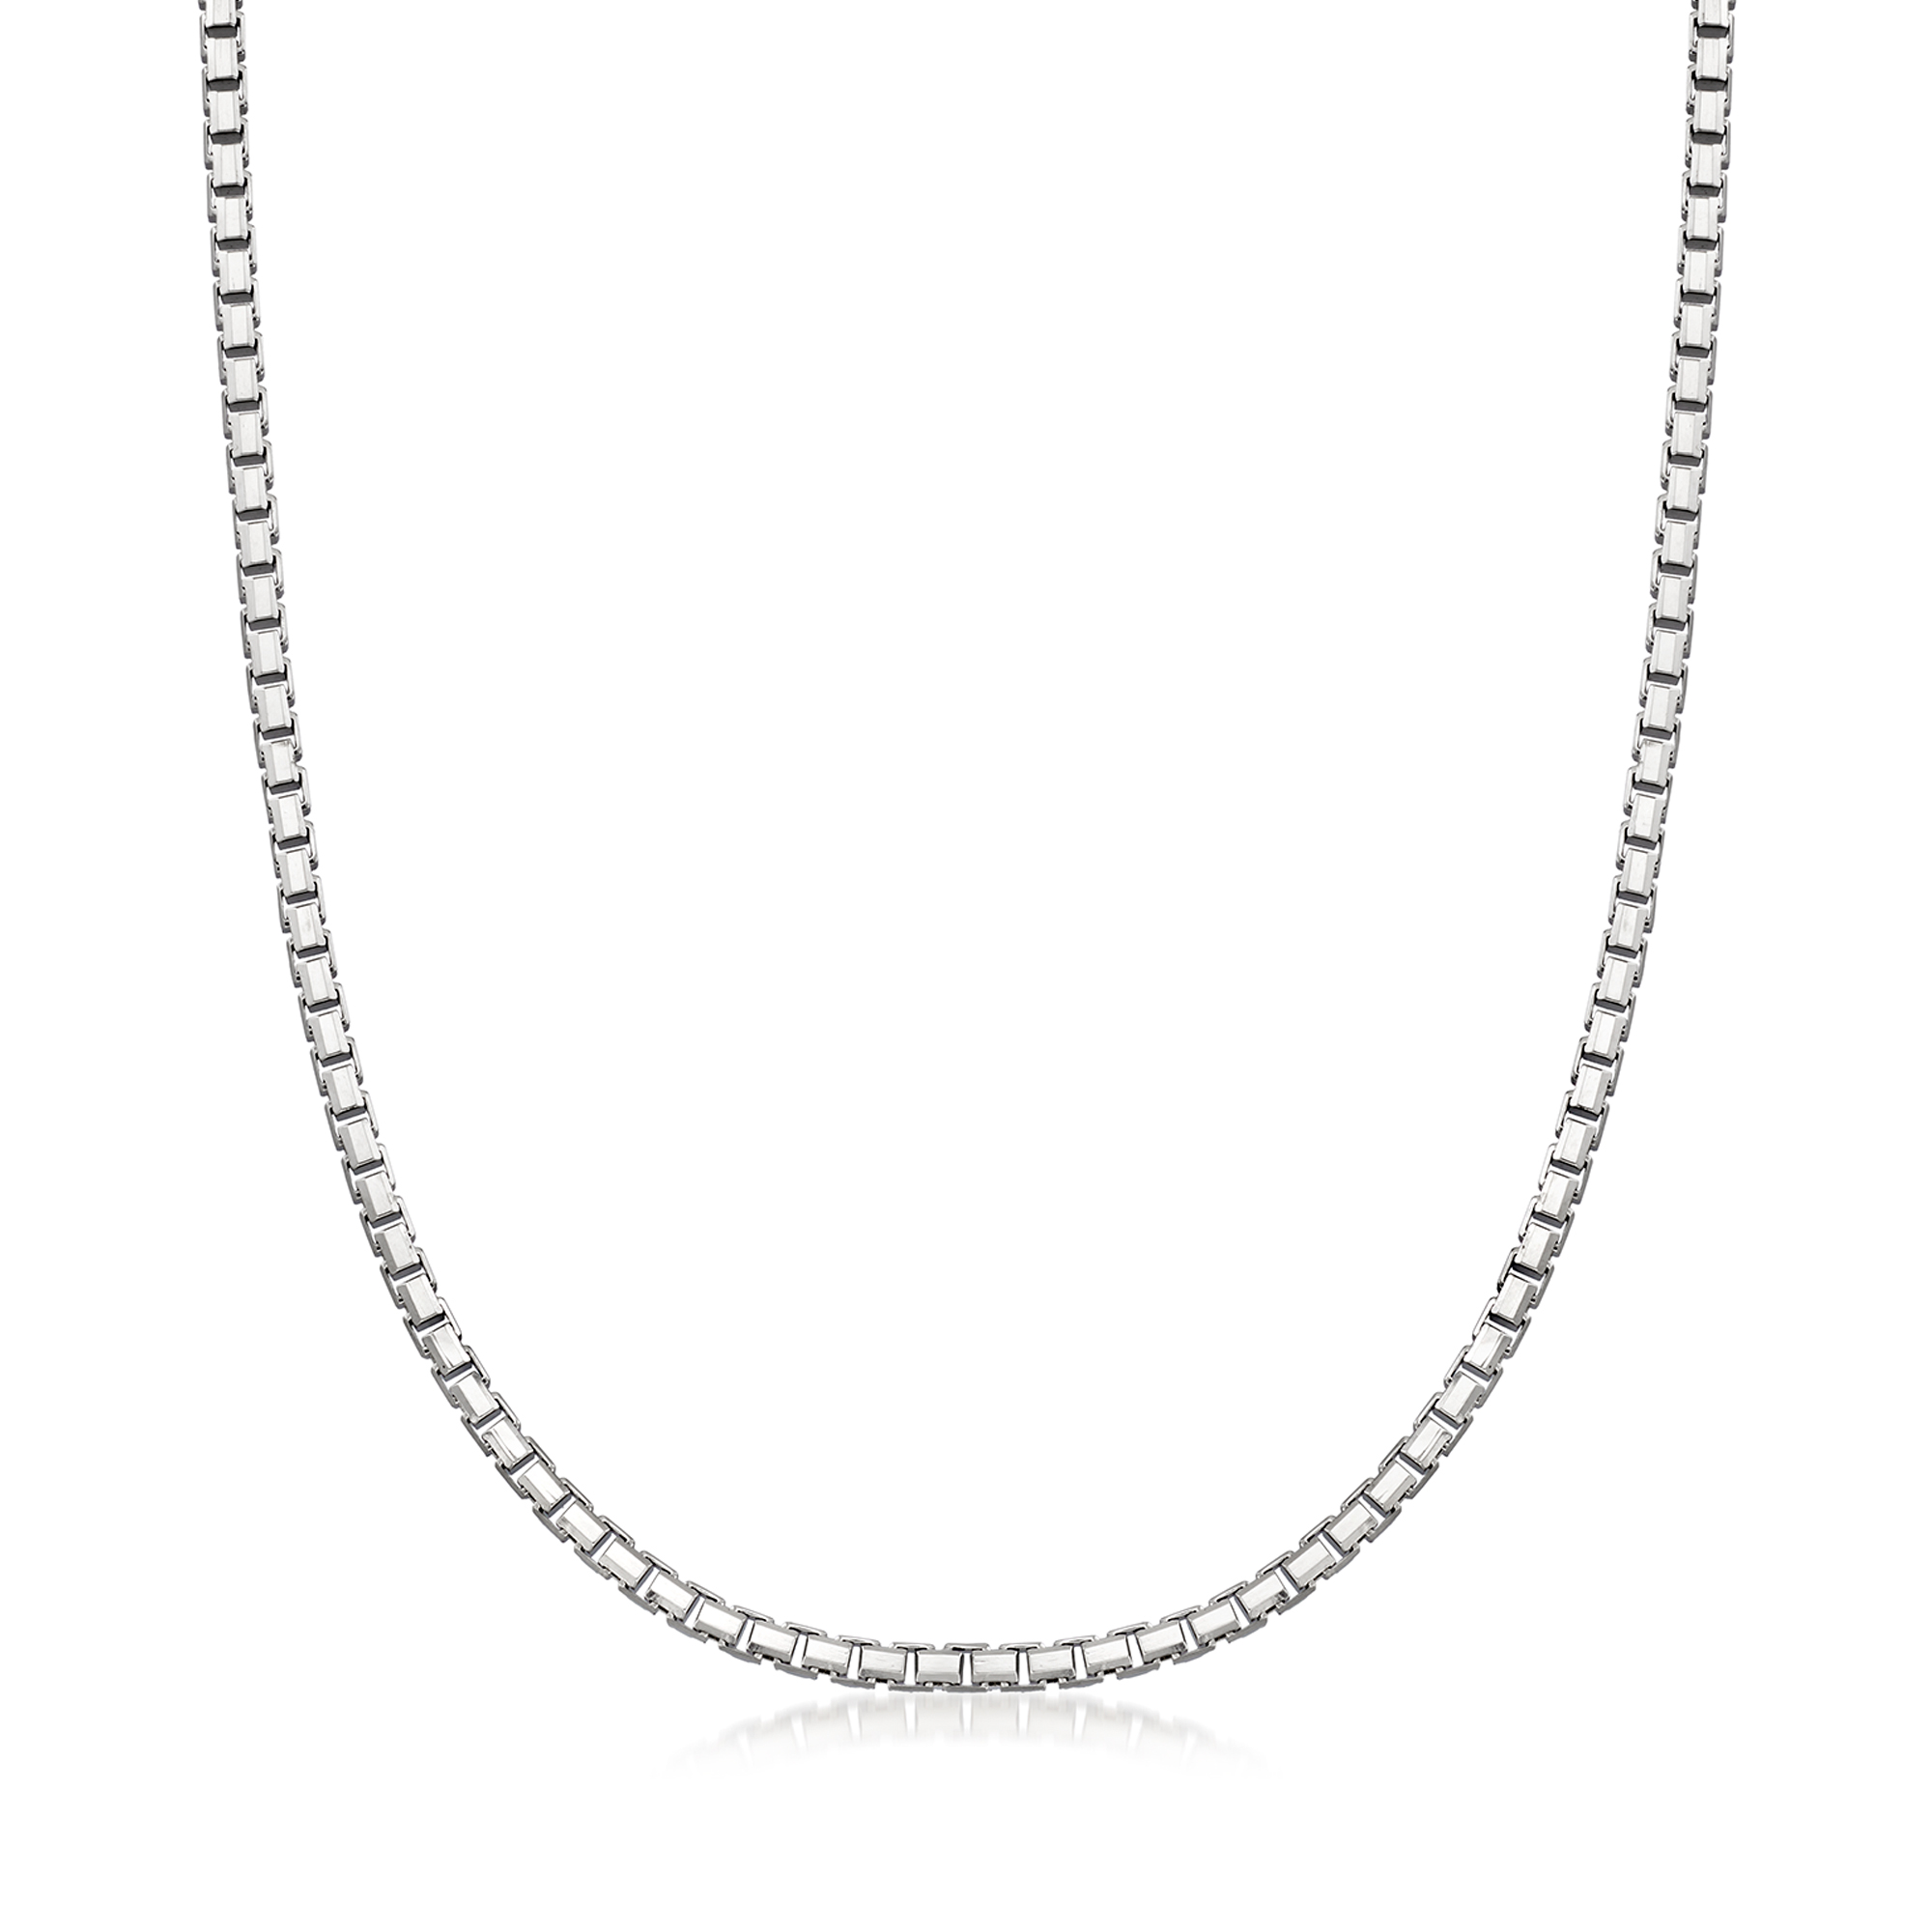 Men's 3.4mm Sterling Silver Box Chain Necklace | Ross-Simons